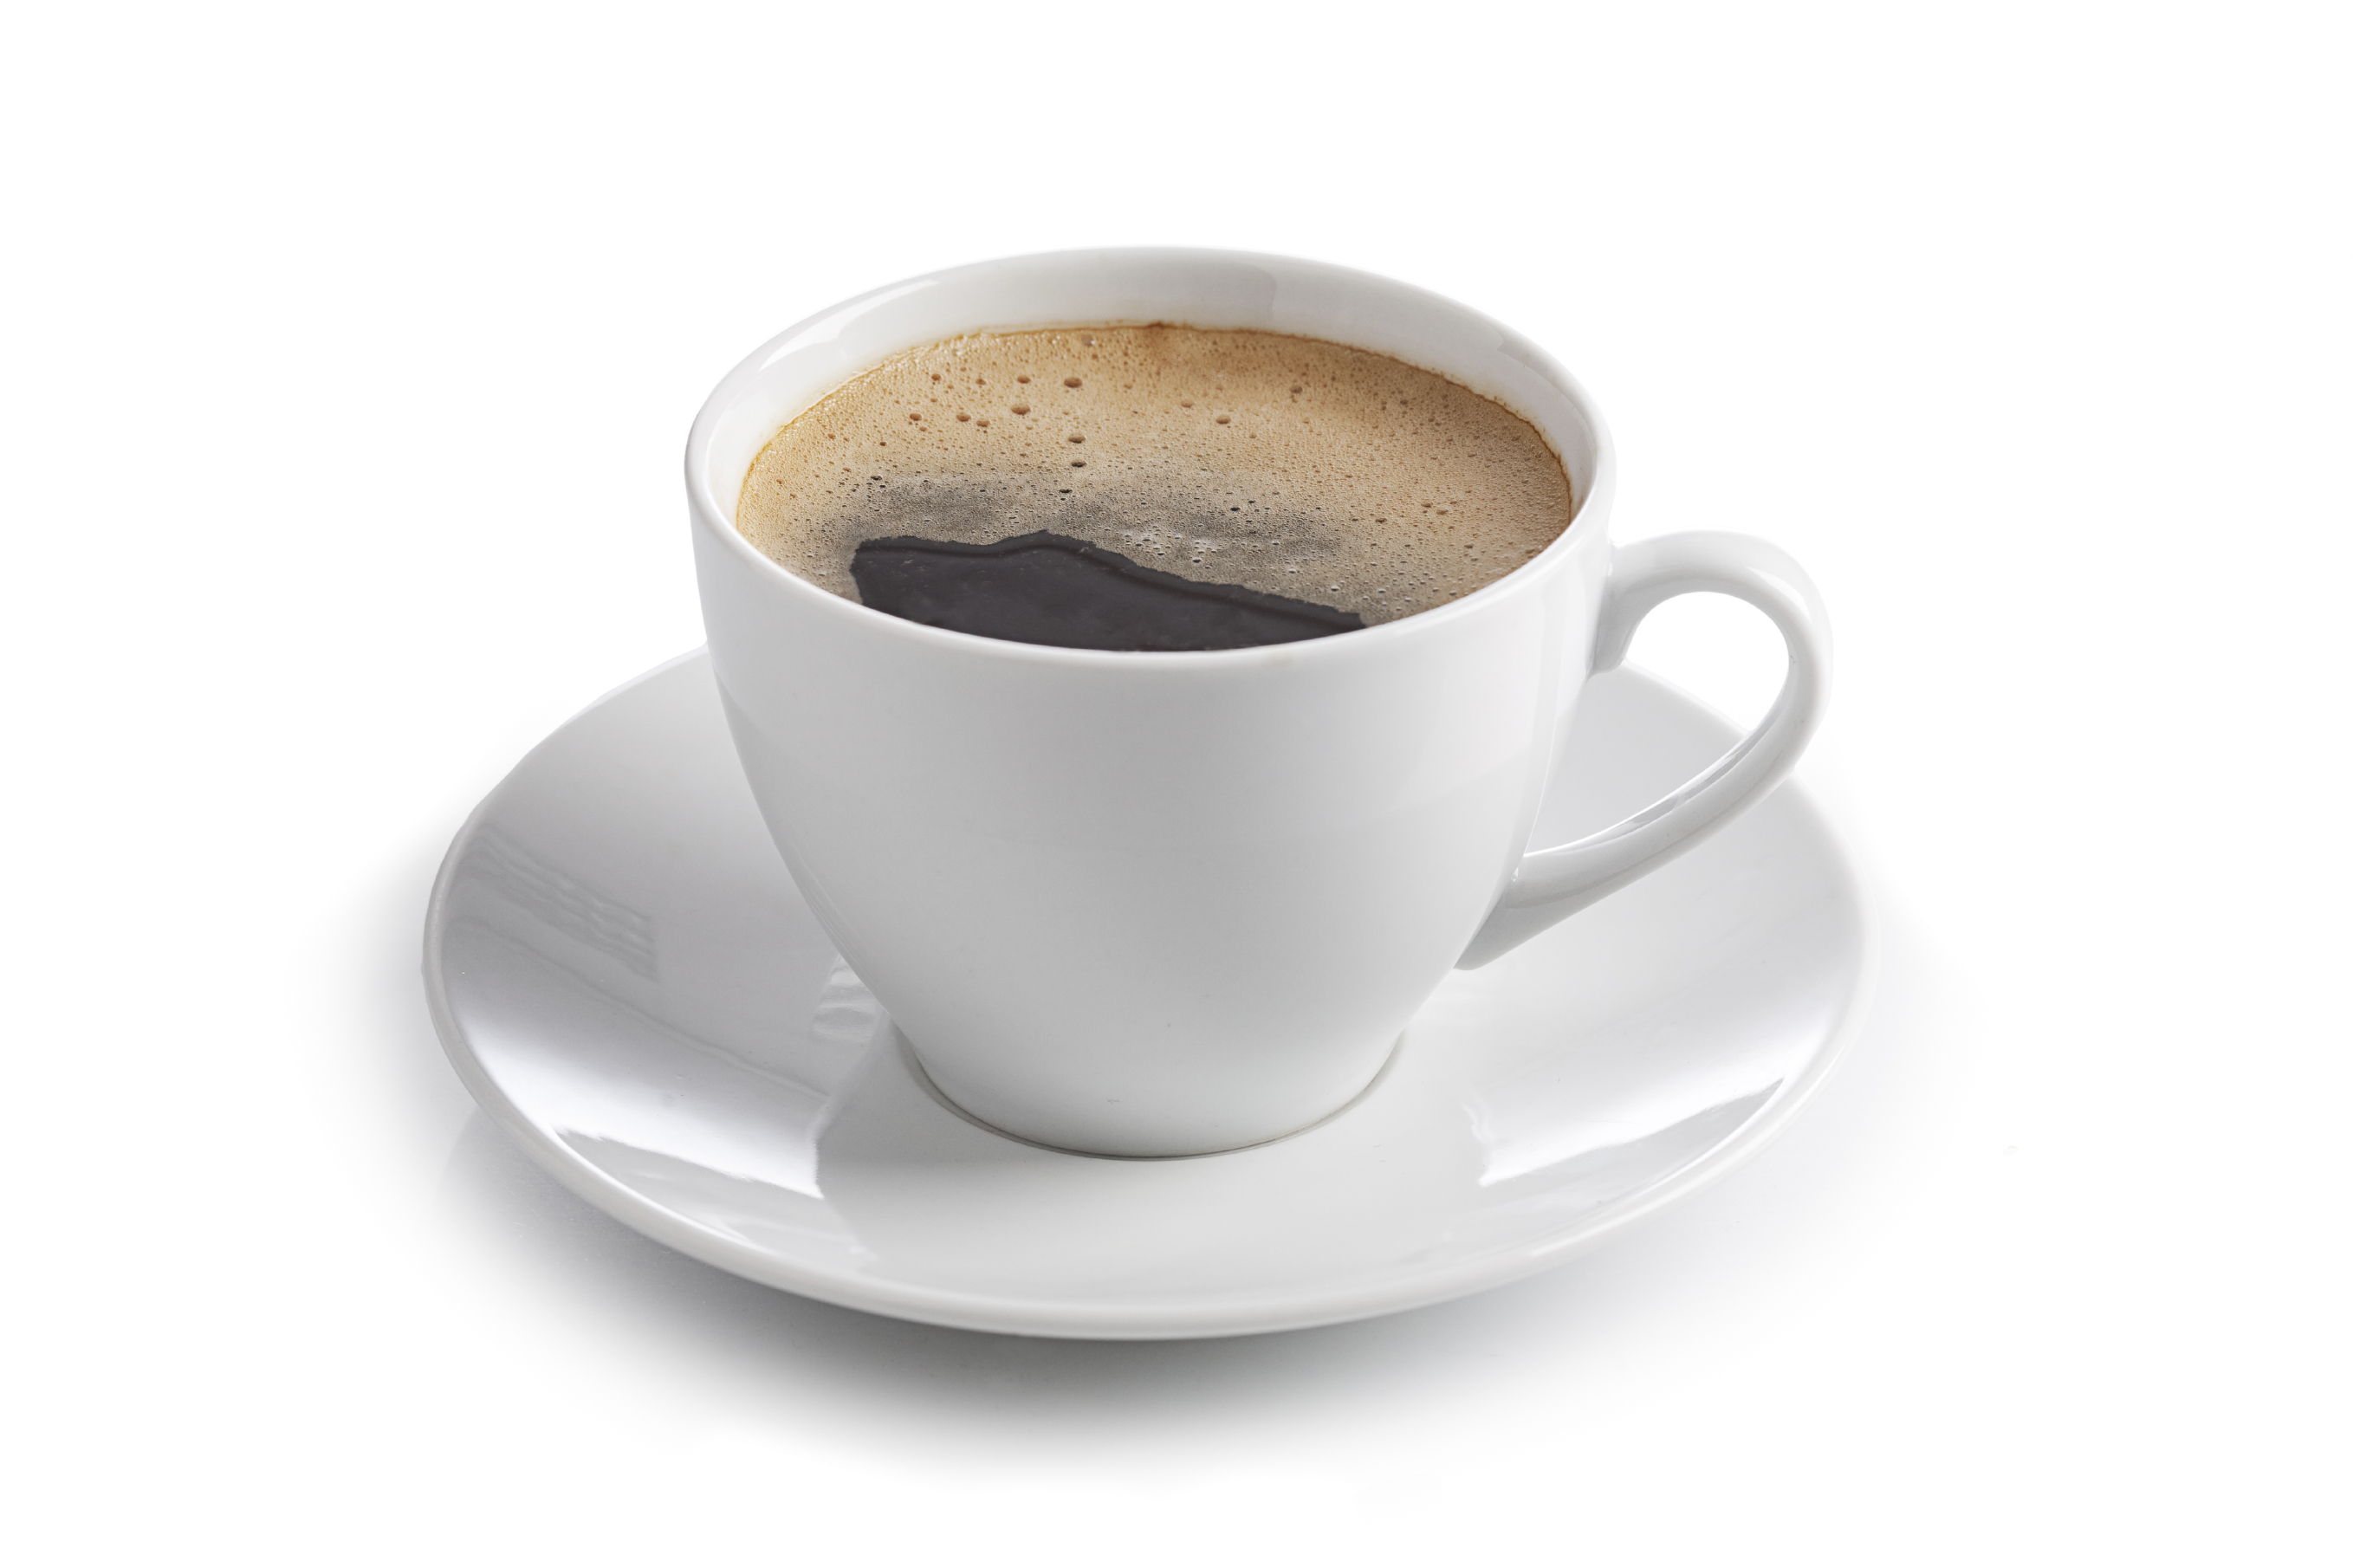 Coffee Png Image PNG Image